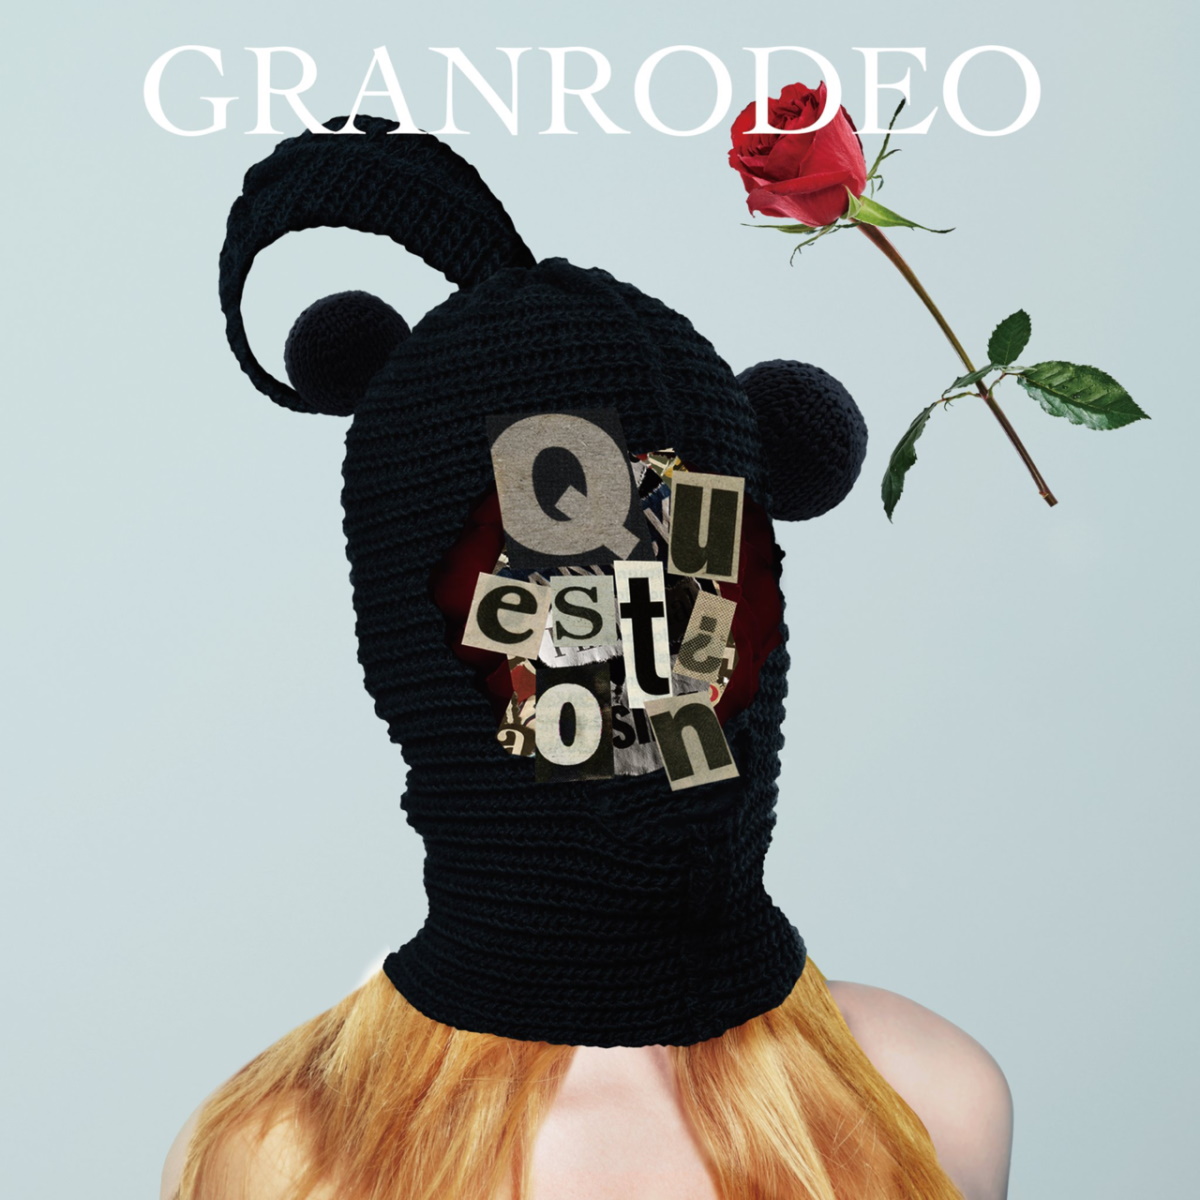 『GRANRODEO - Give me your eyes 歌詞』収録の『Question』ジャケット